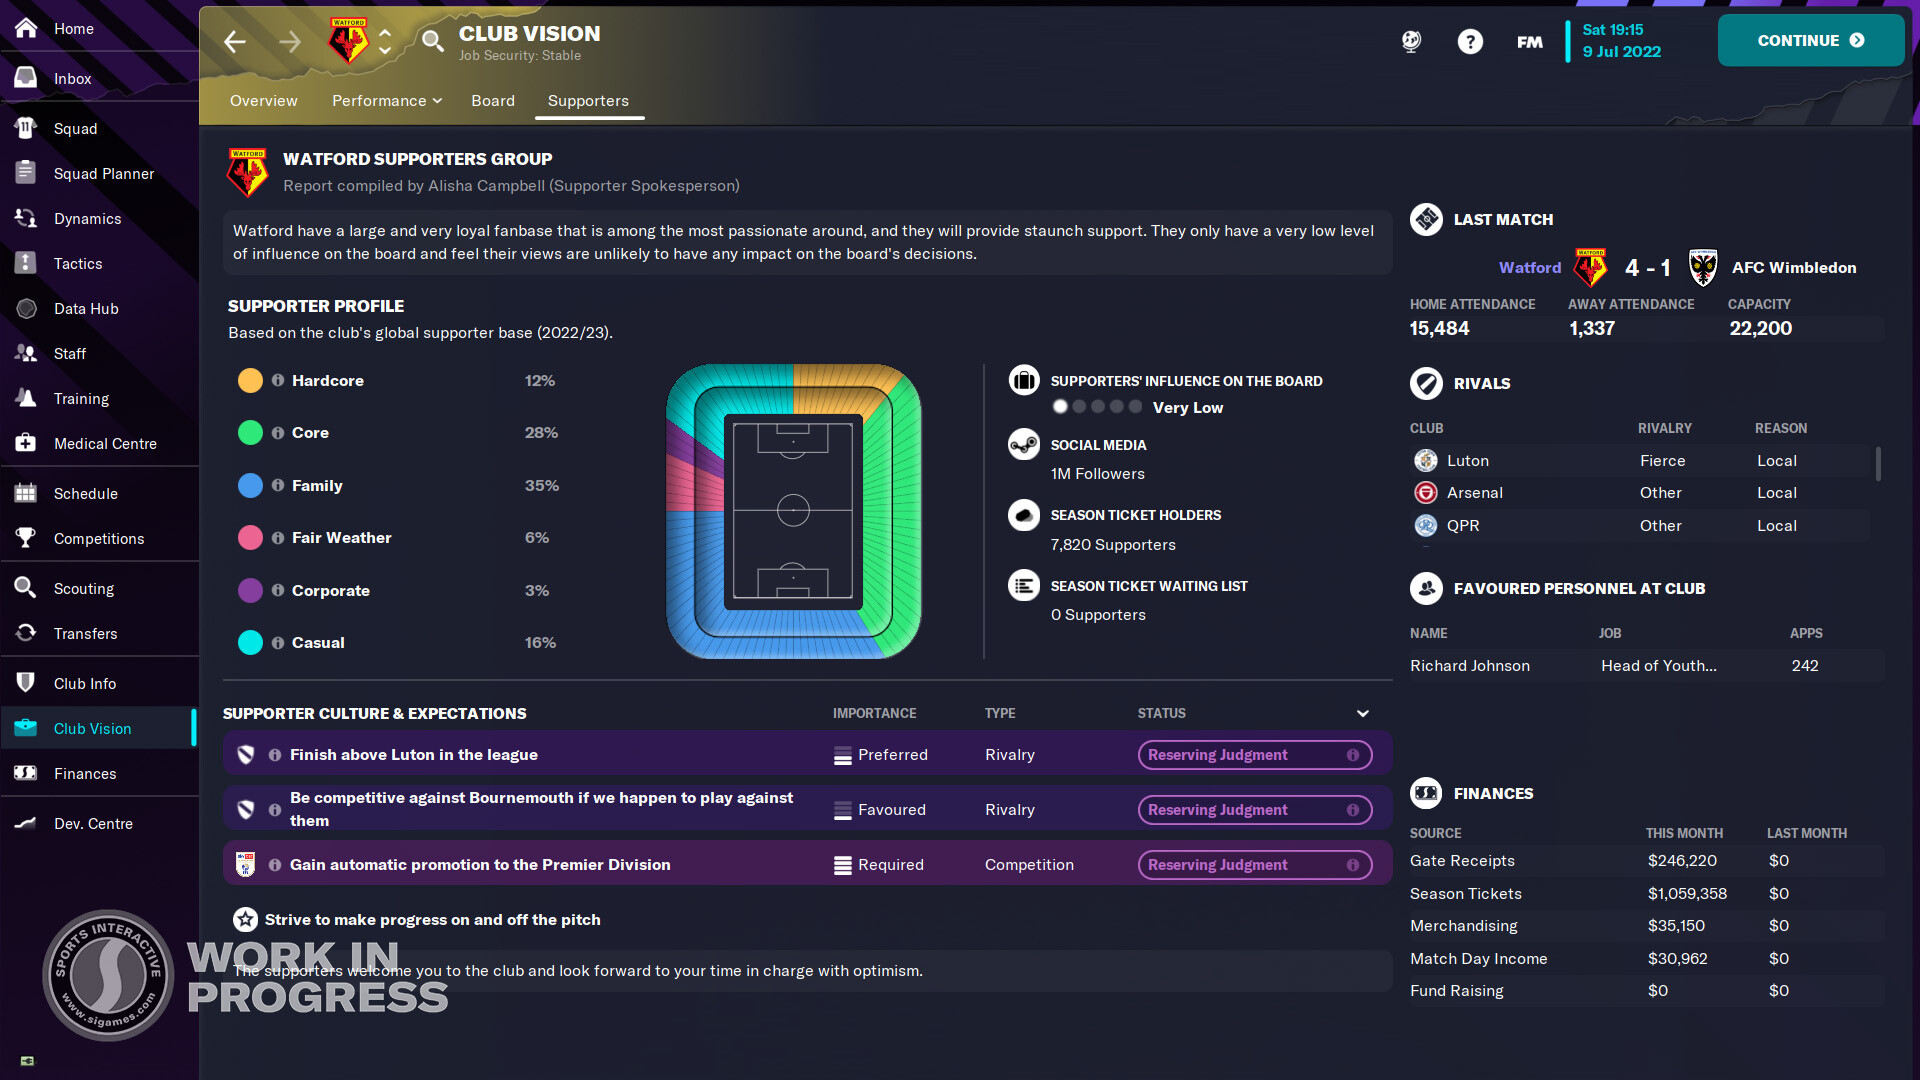 ⭐️ Football Manager 2023 +In-game Editor STEAM (GLOBAL)